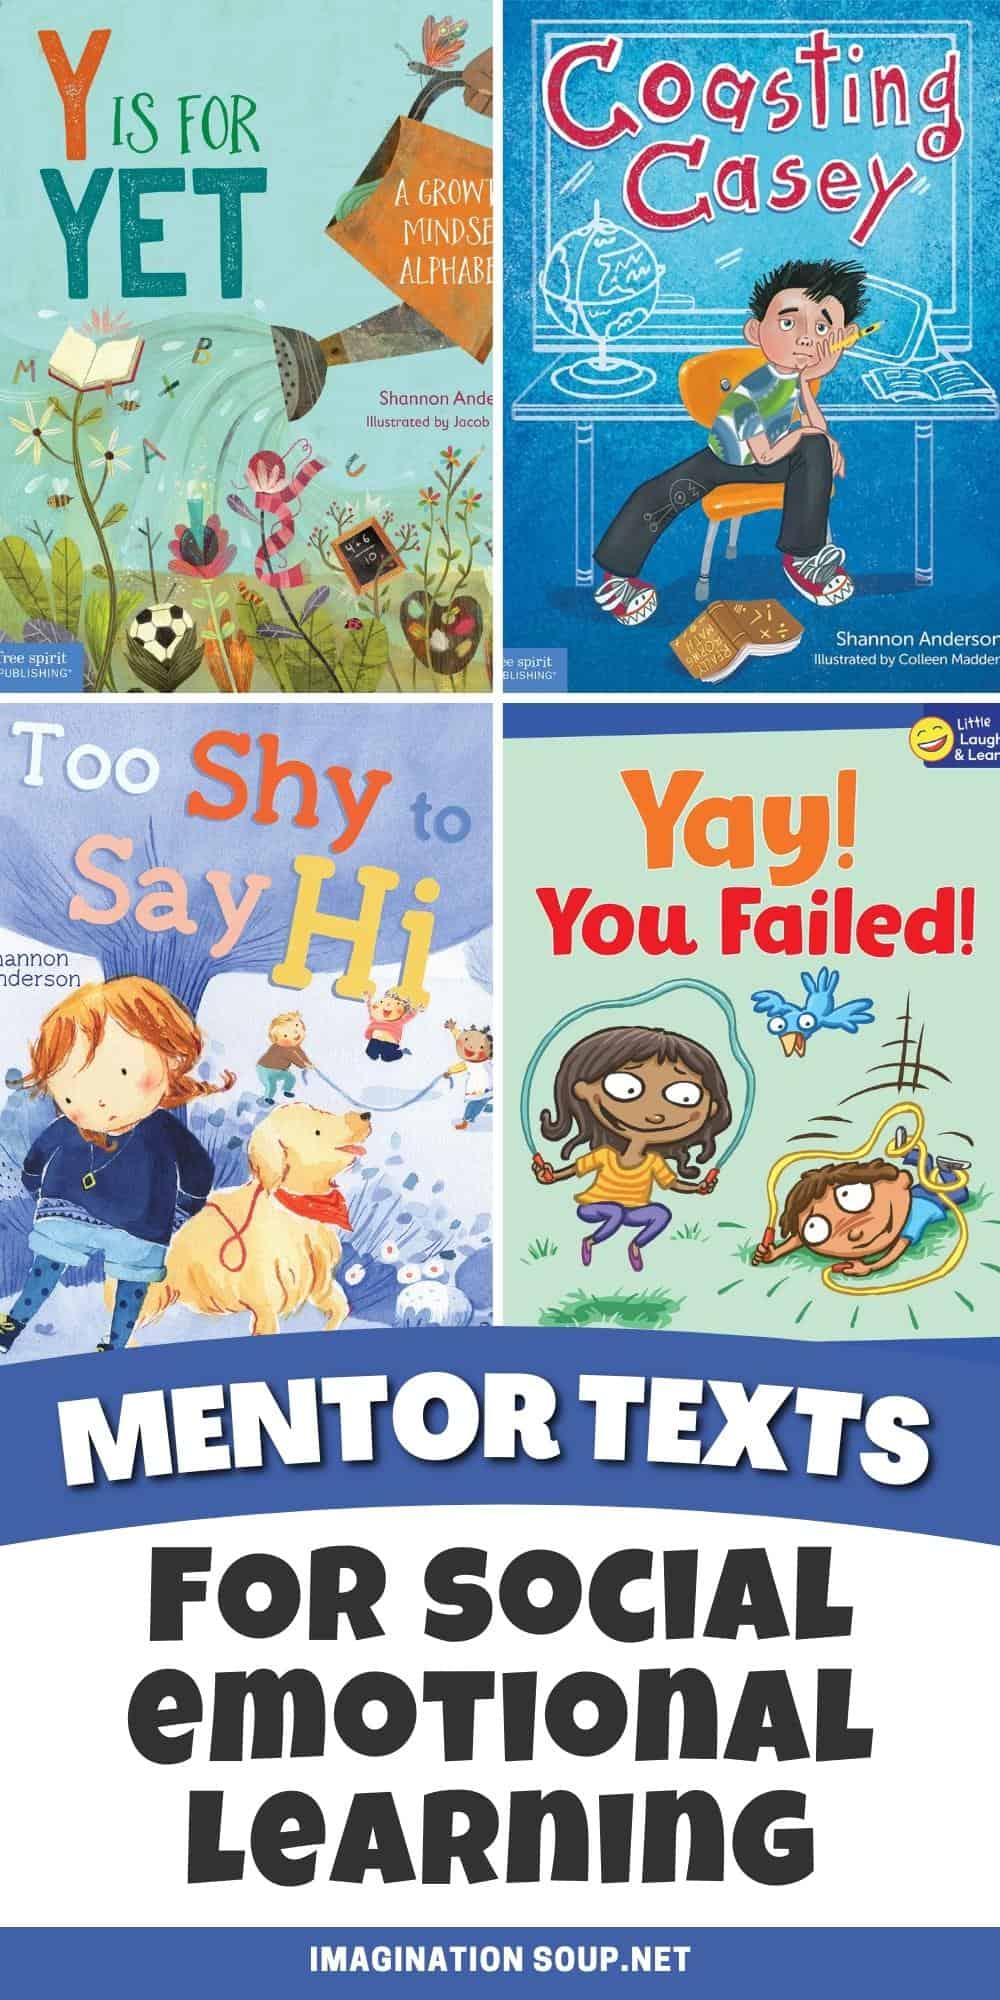 Using Mentor Texts to Discuss Social and Emotional Topics